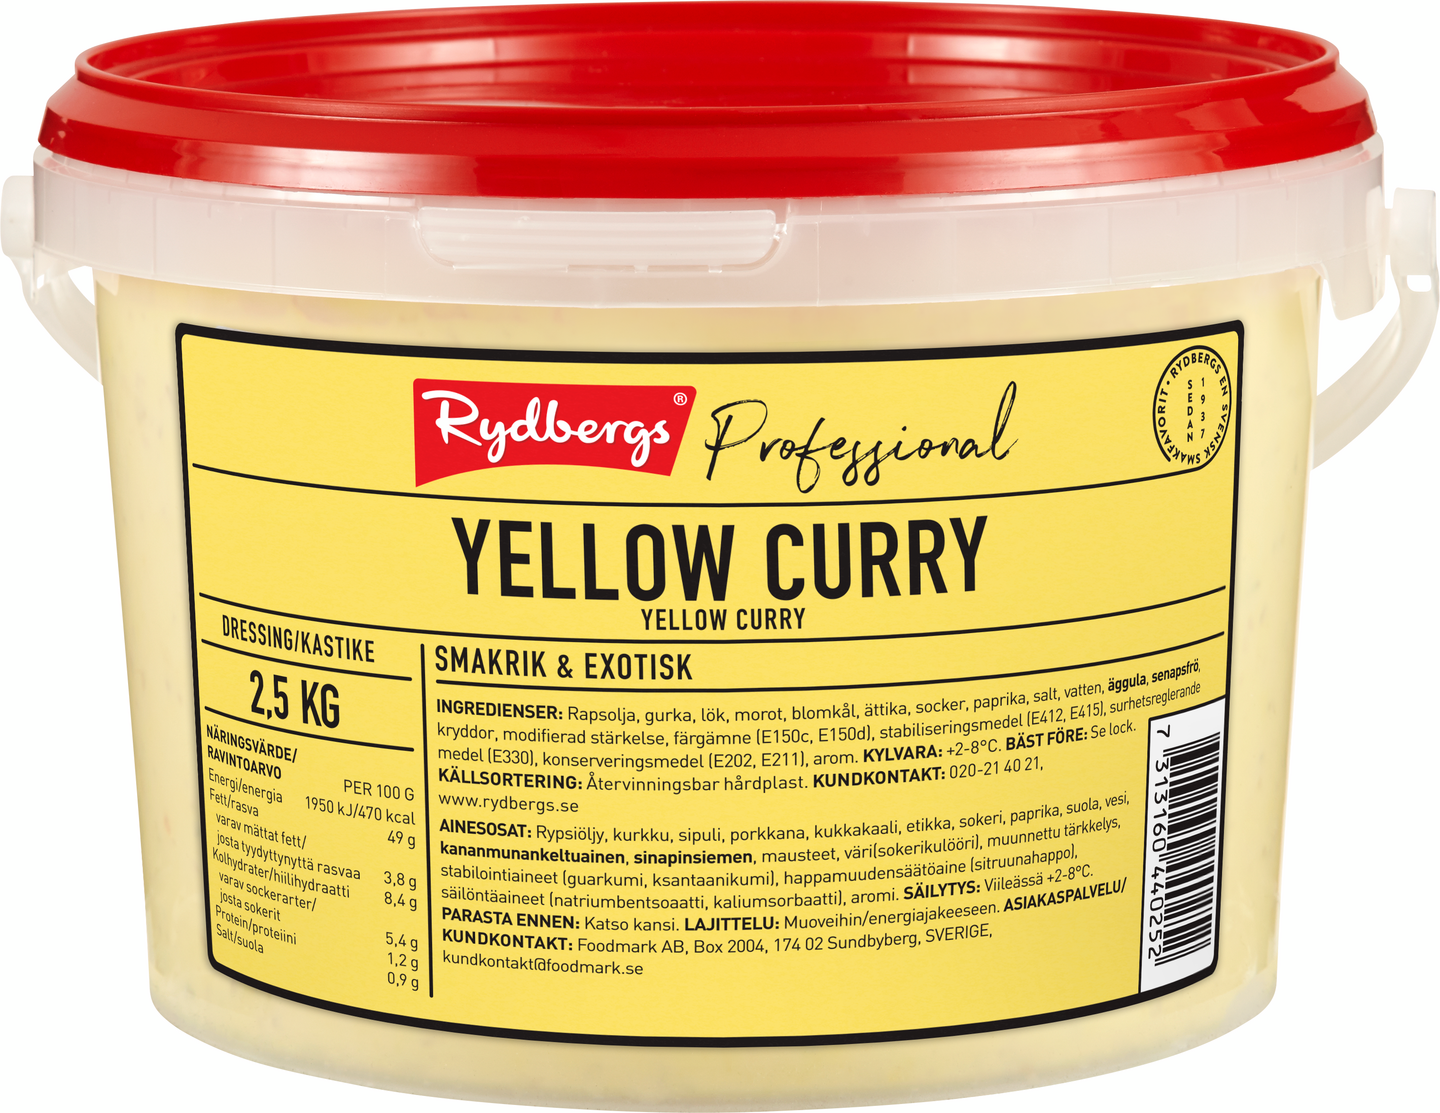 Rydbergs yellow currydressing 2,5kg